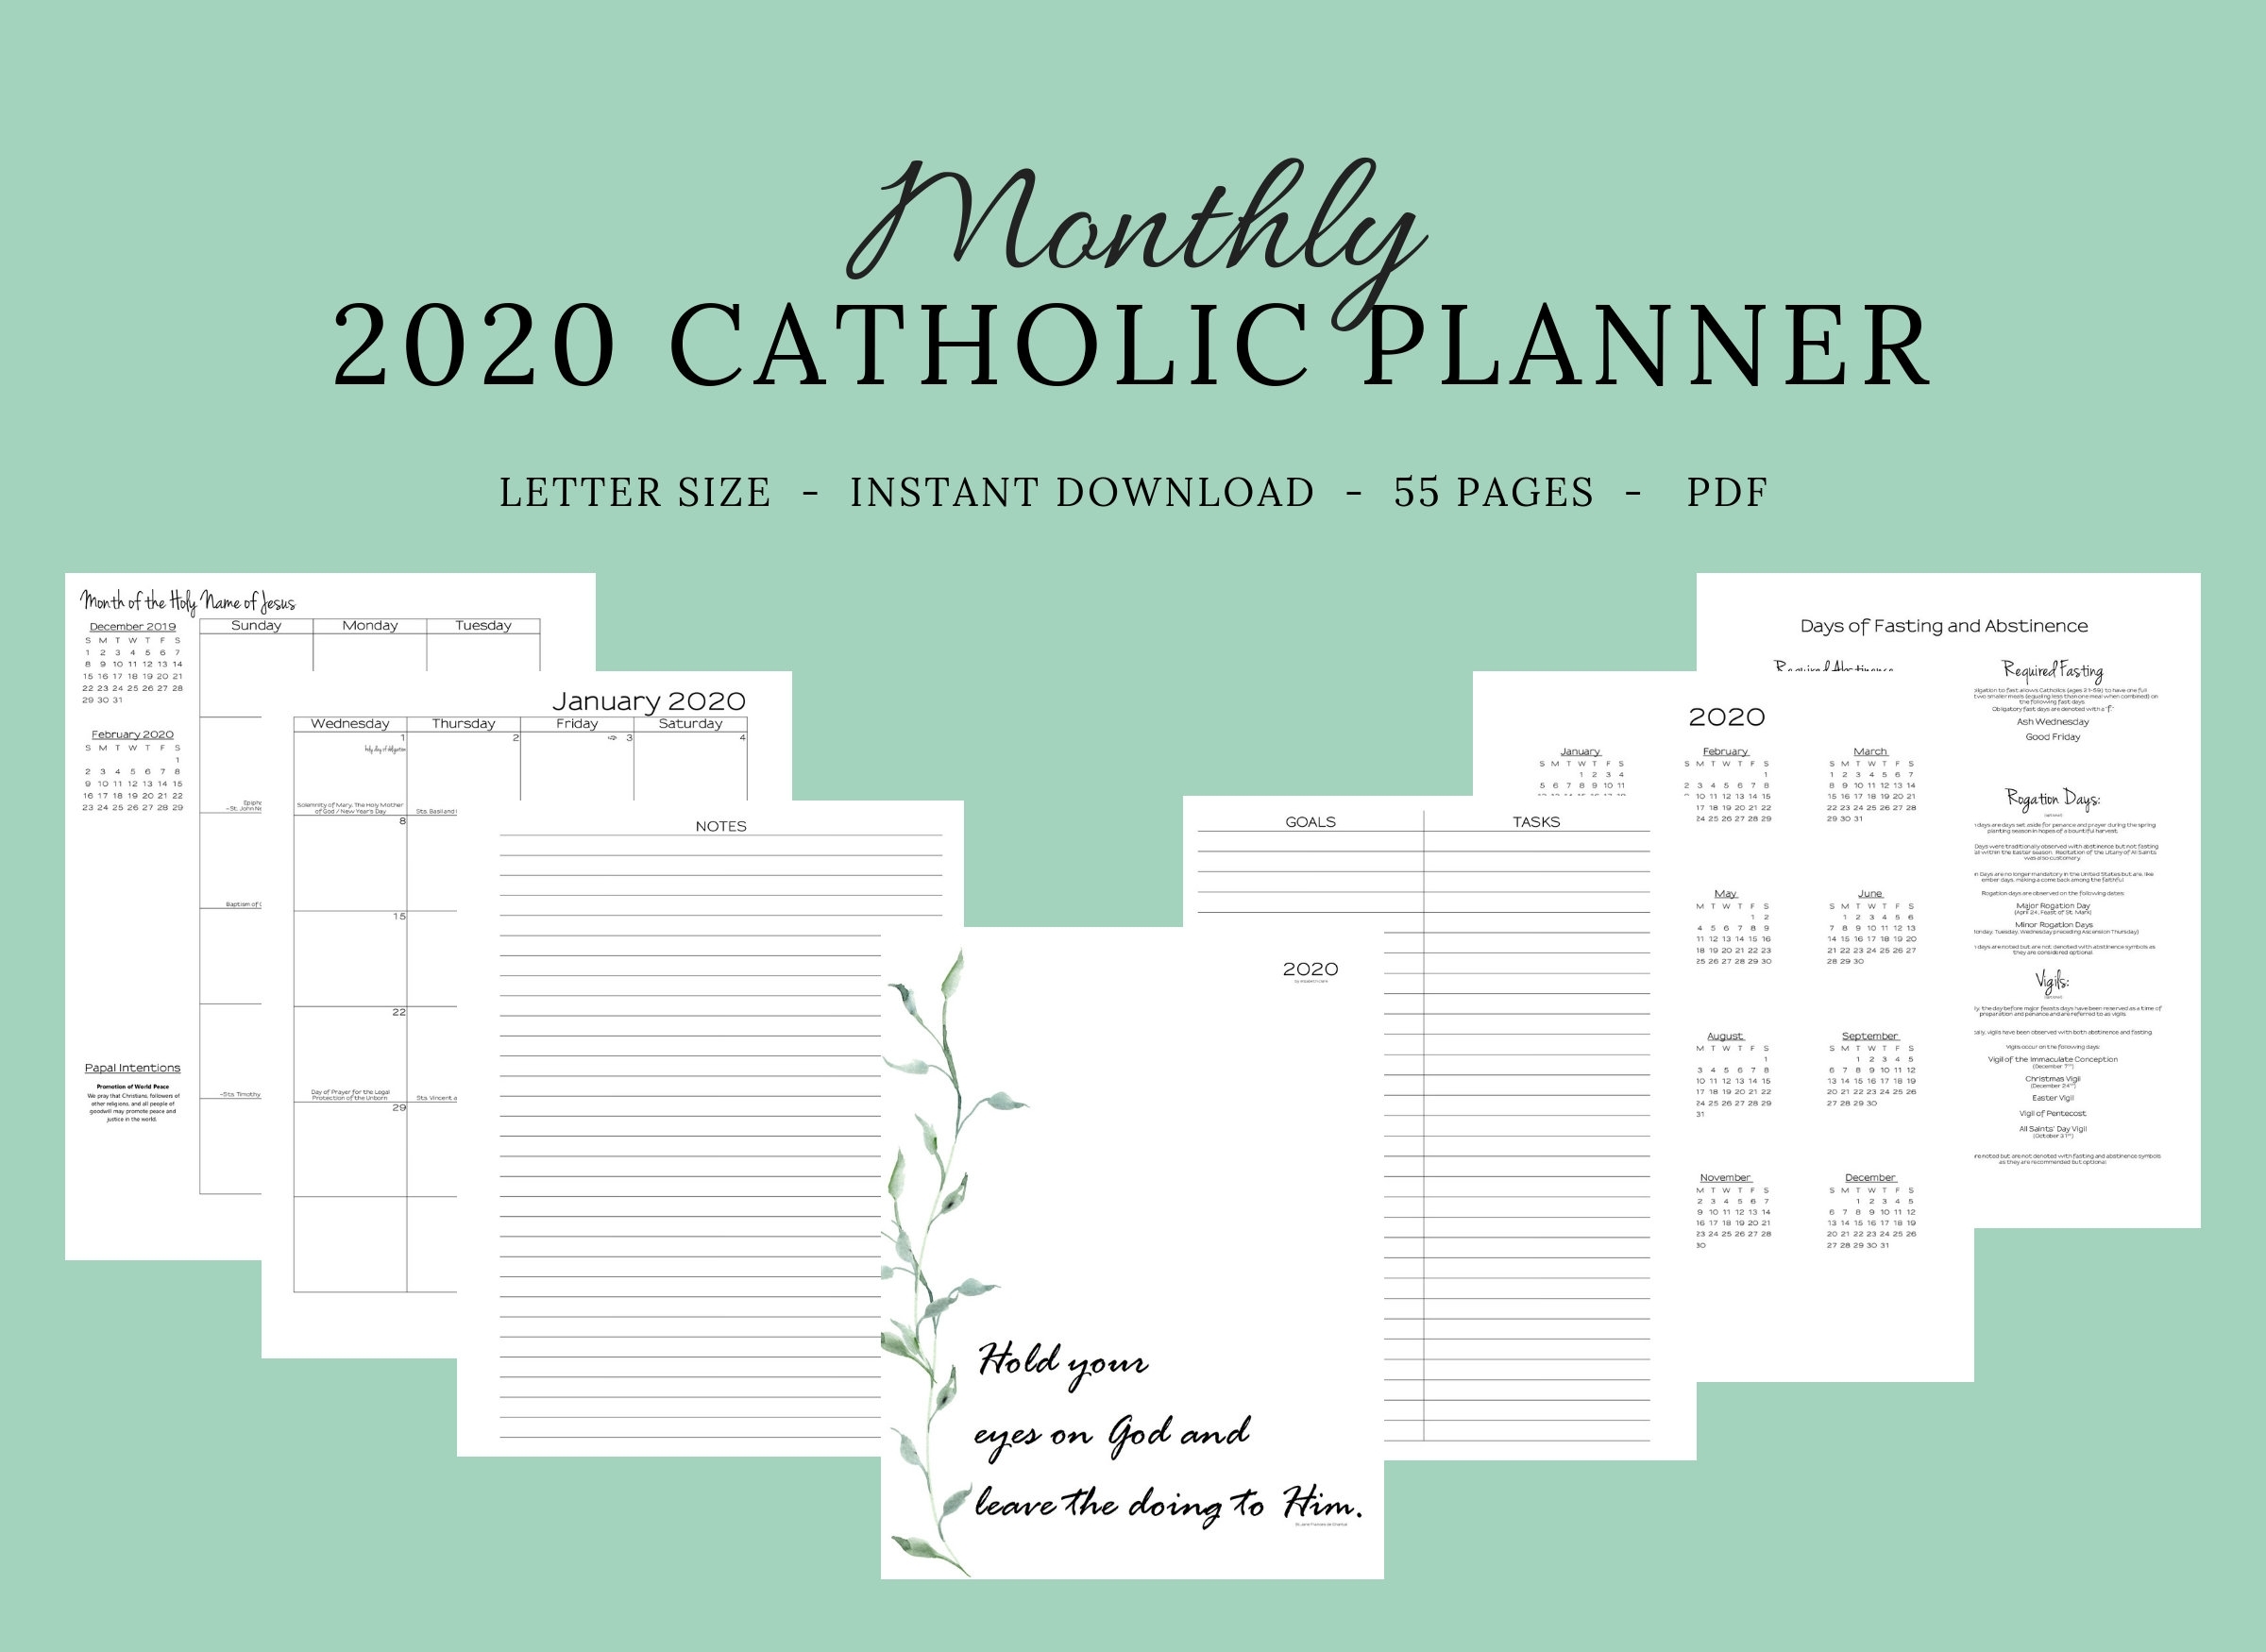 2020 Catholic Planner Monthly Printable: Monthly Planner / | Etsy for Printable Catholic Liturgical Calendar 2020